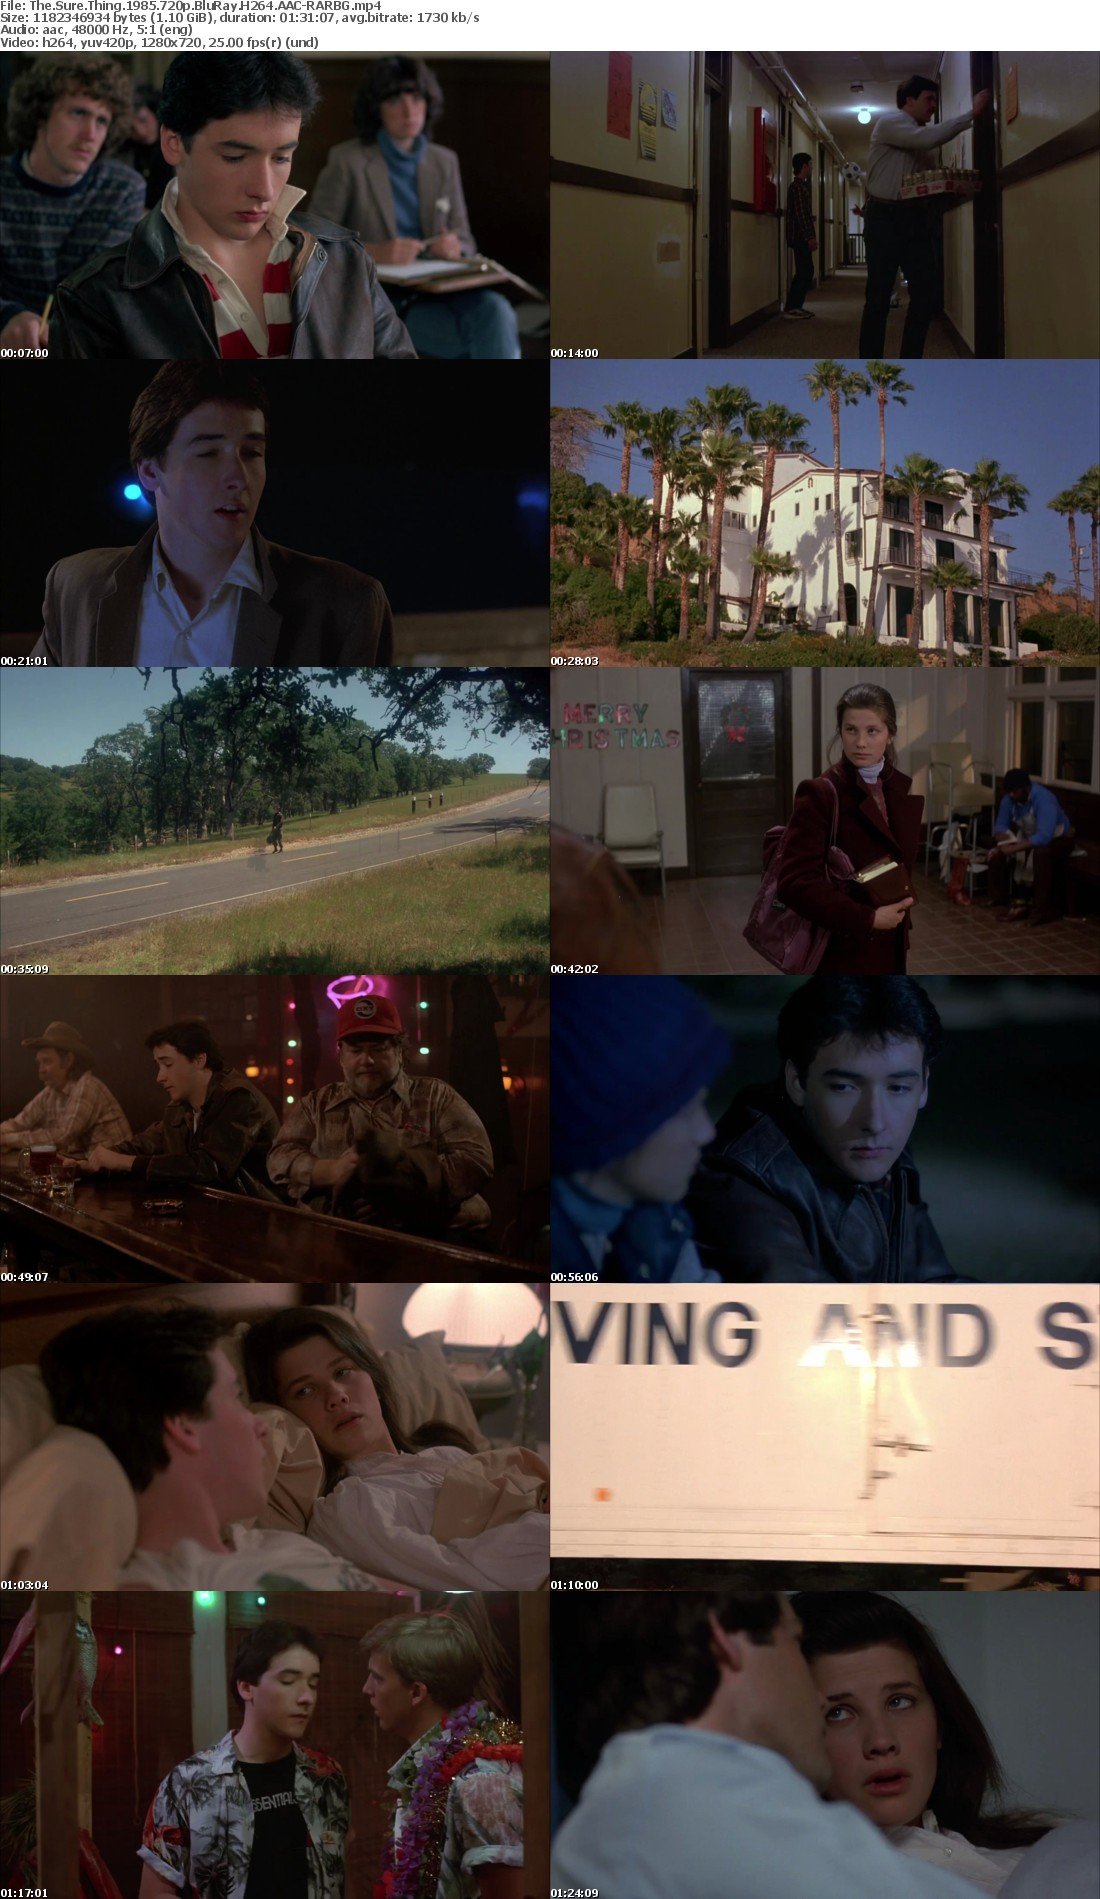 Download The Sure Thing 1985 720p BluRay H264 AAC-RARBG - So